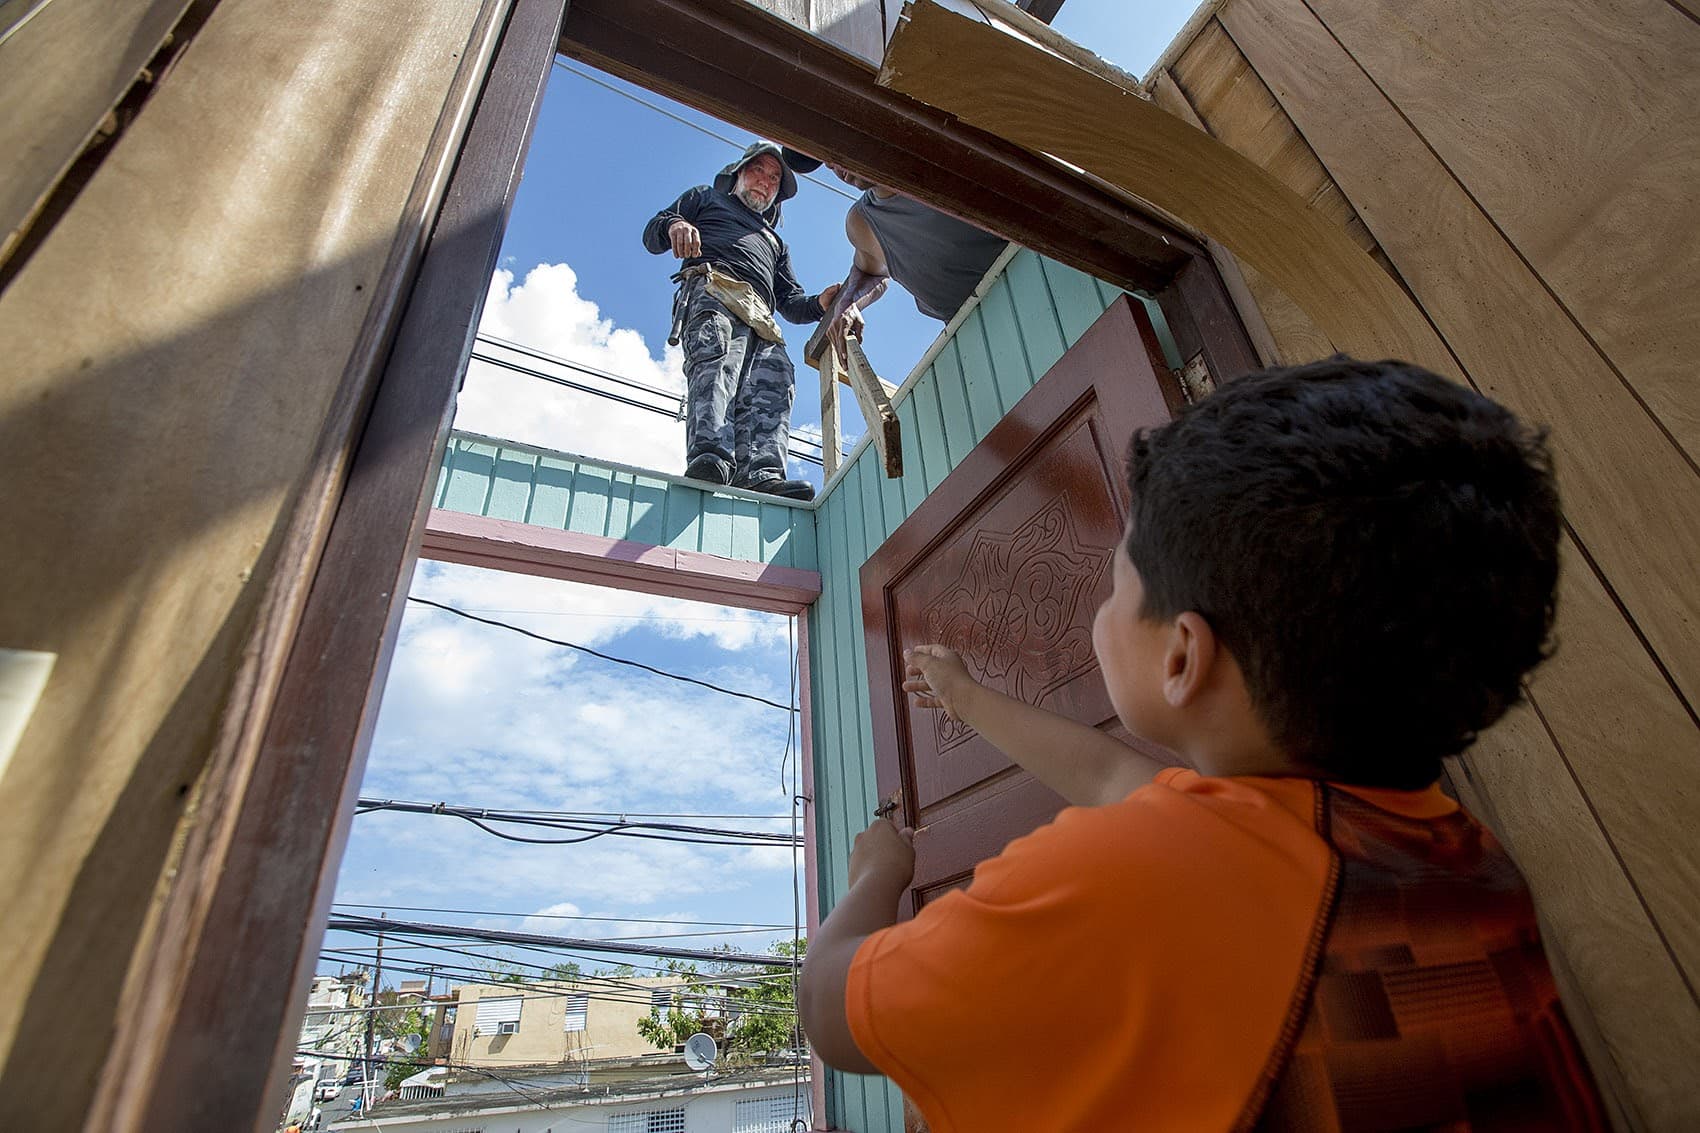 Jose Lopez hands a small board to Anthony Geigel and Israel Garcia to repair their roof in Barrio Obrero Santurce. (Jesse Costa/WBUR)